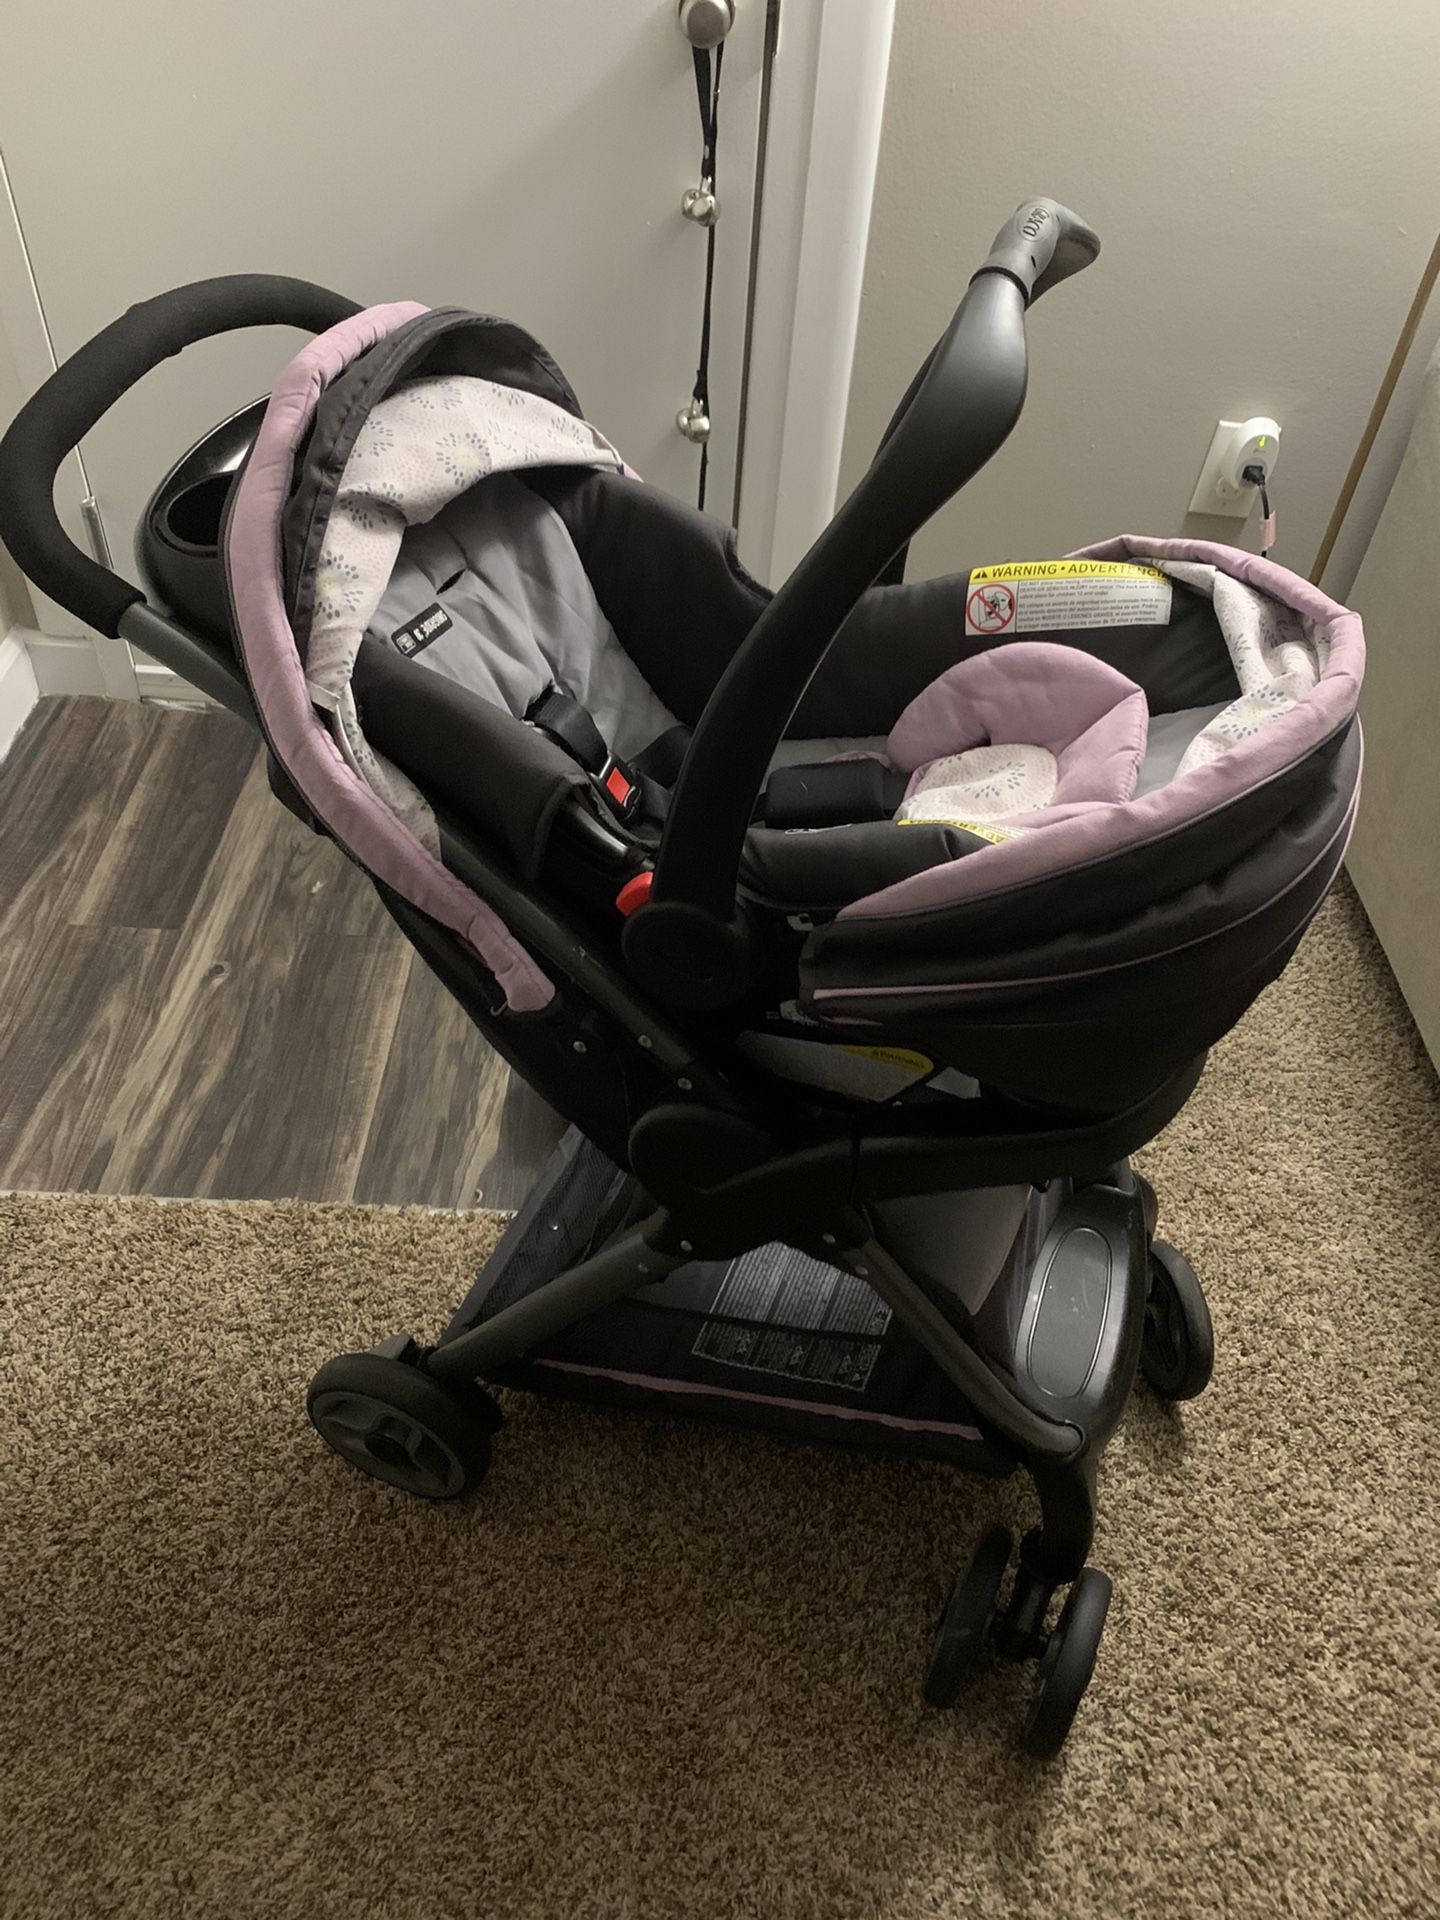 Graco carseat, base and stroller set.